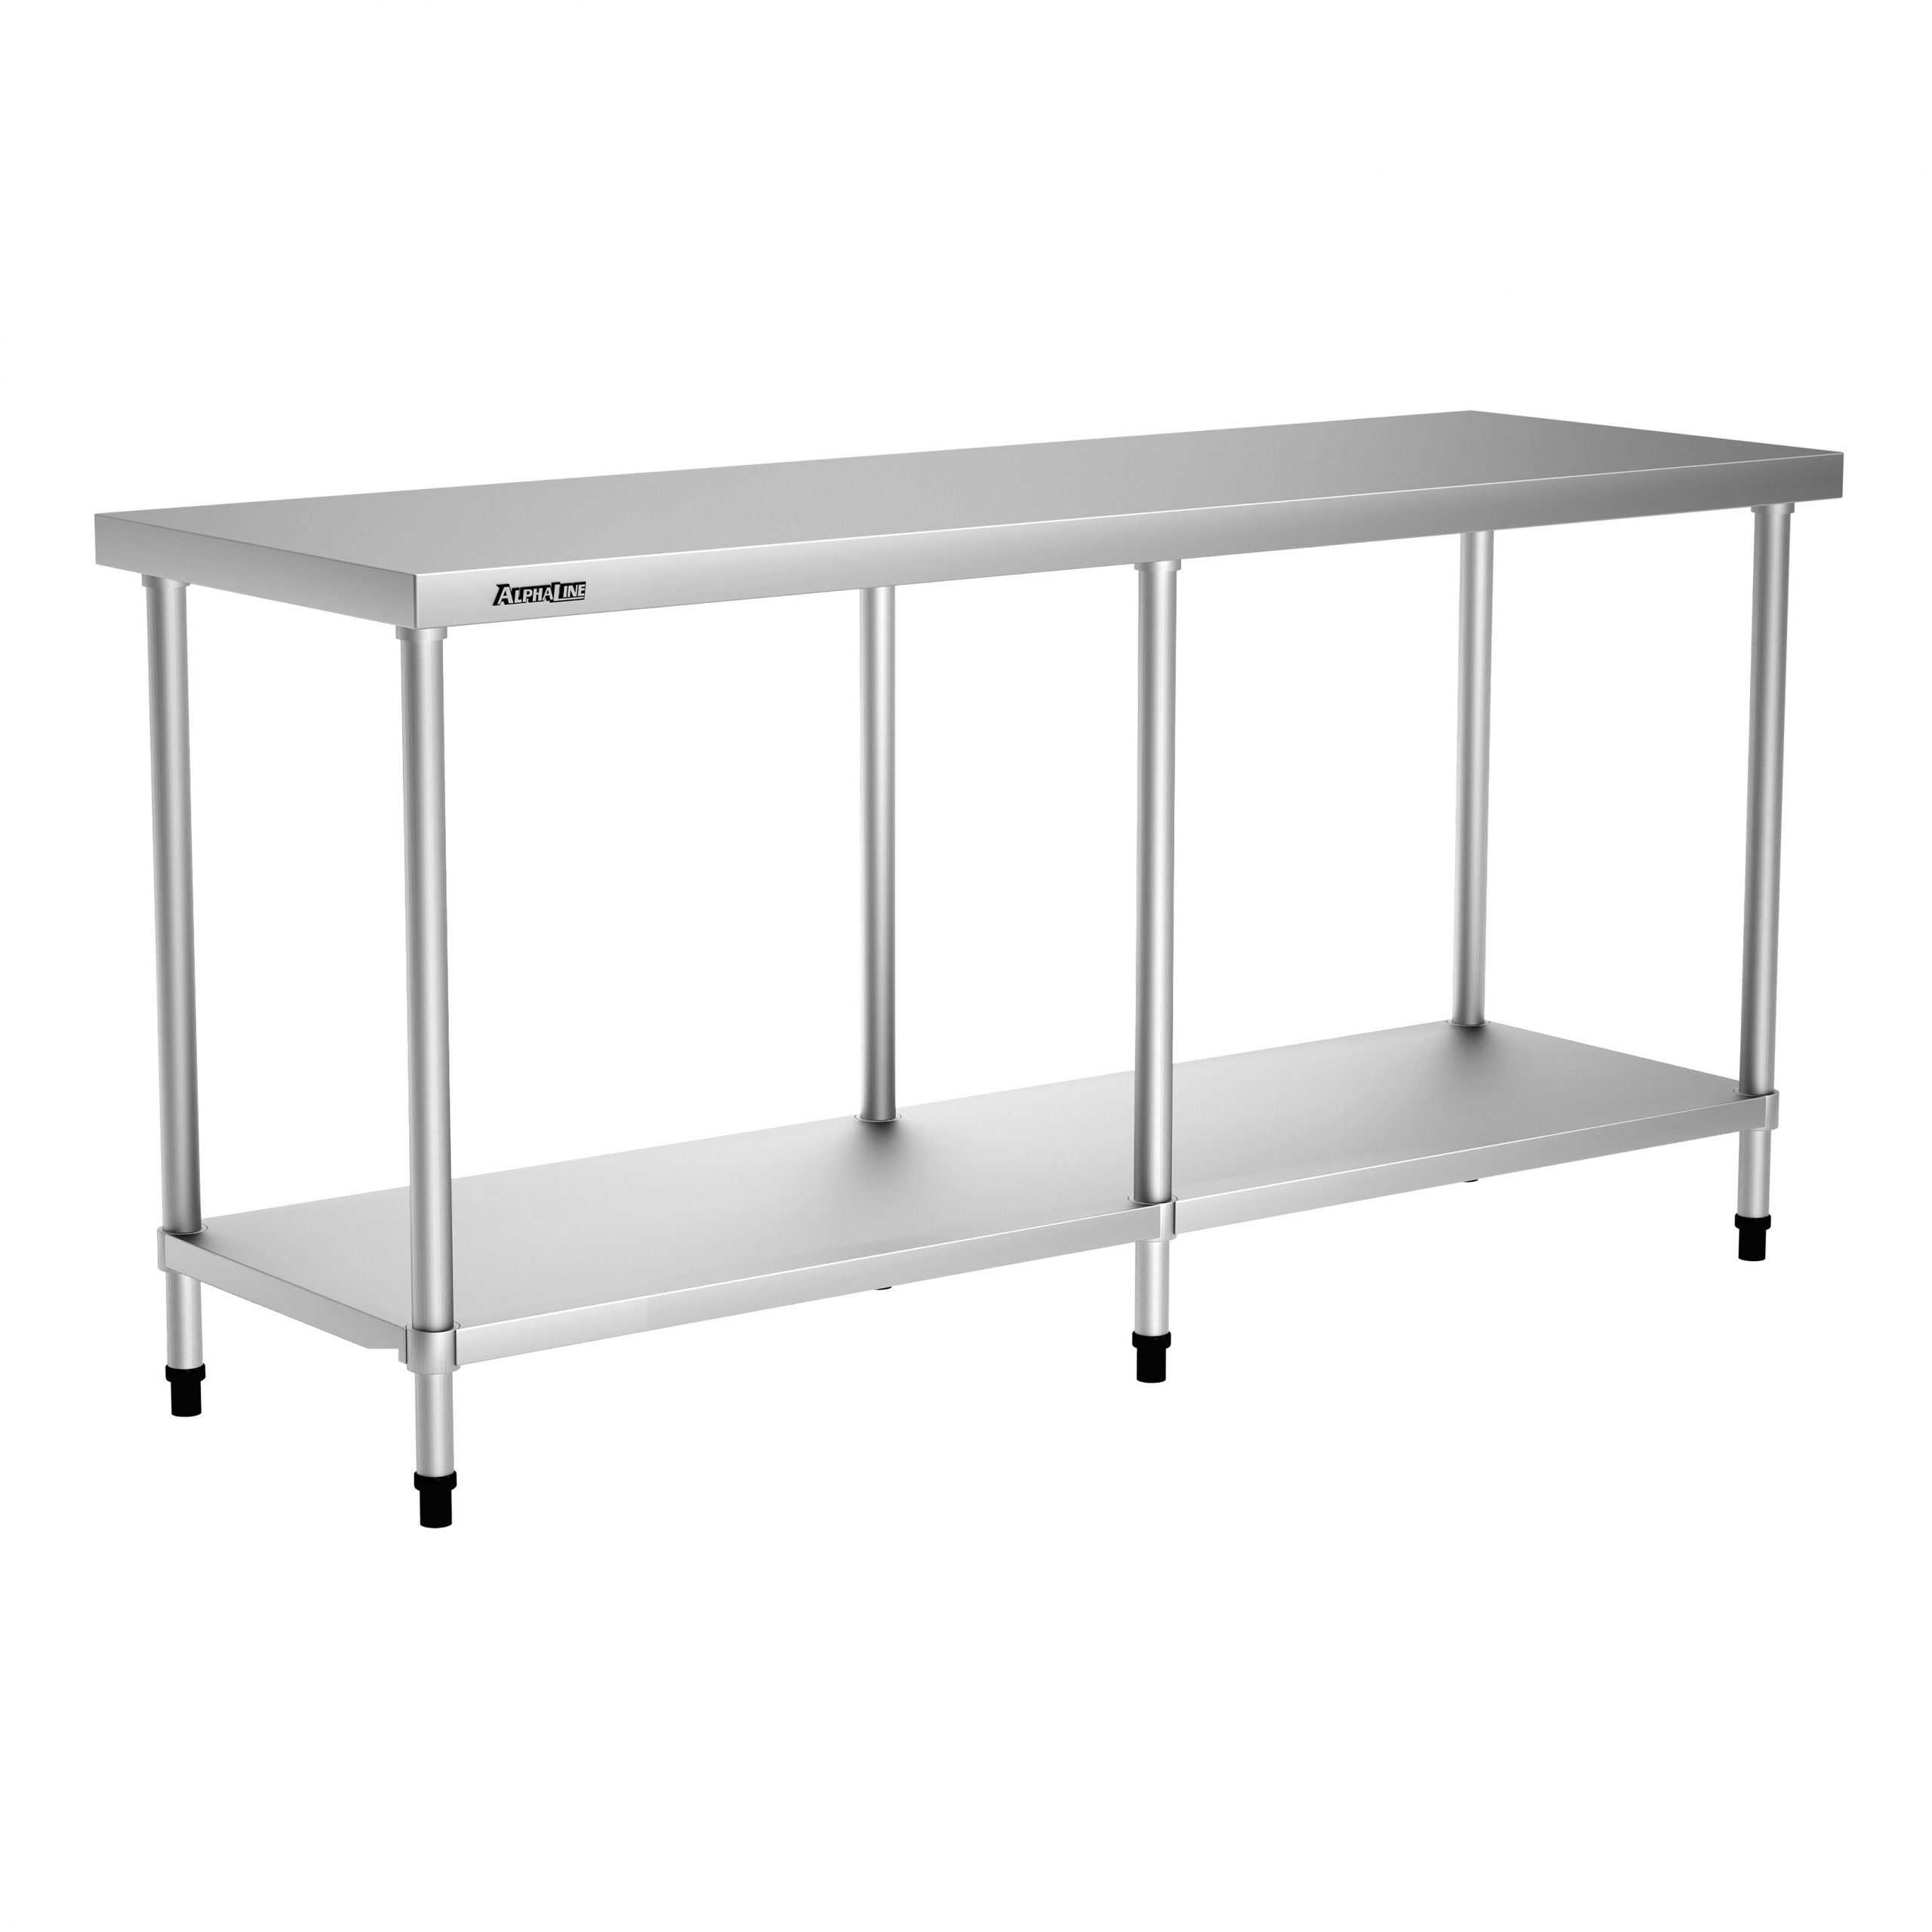 Stainless Steel Bench 1800 x 600